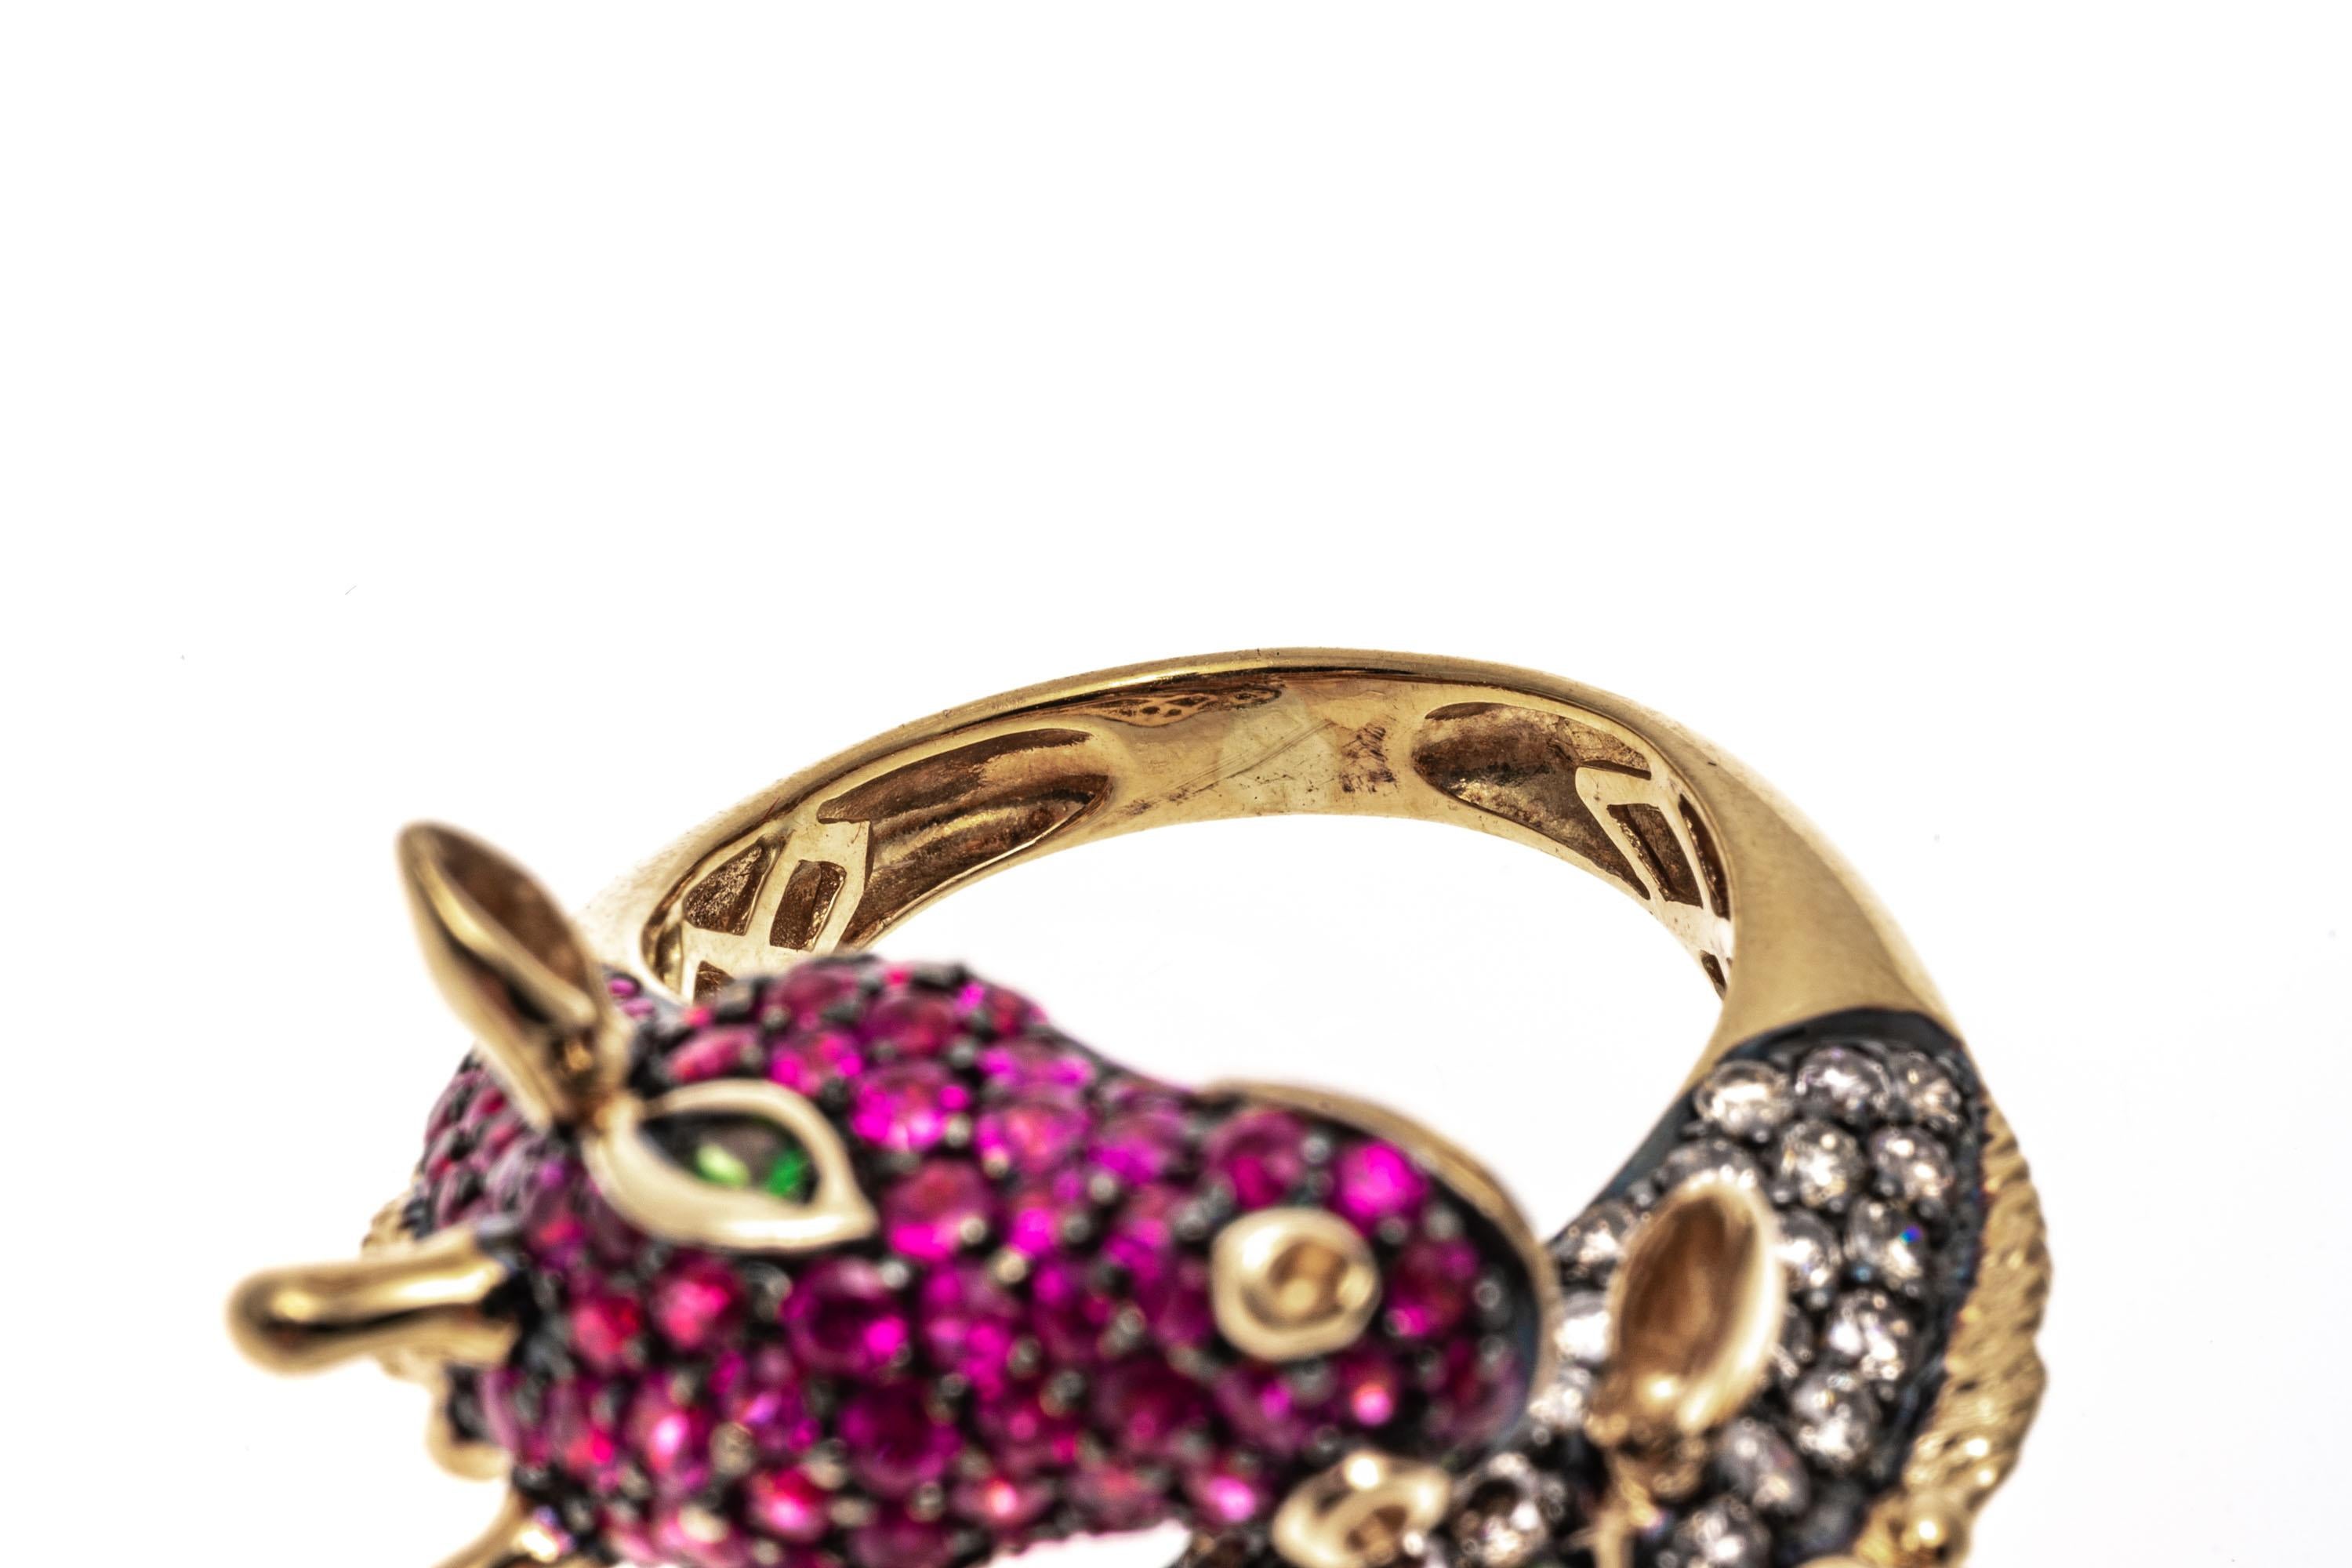 18k Gold Pave Set Cognac Diamond and Pink Sapphire Bypass Giraffes Ring For Sale 4